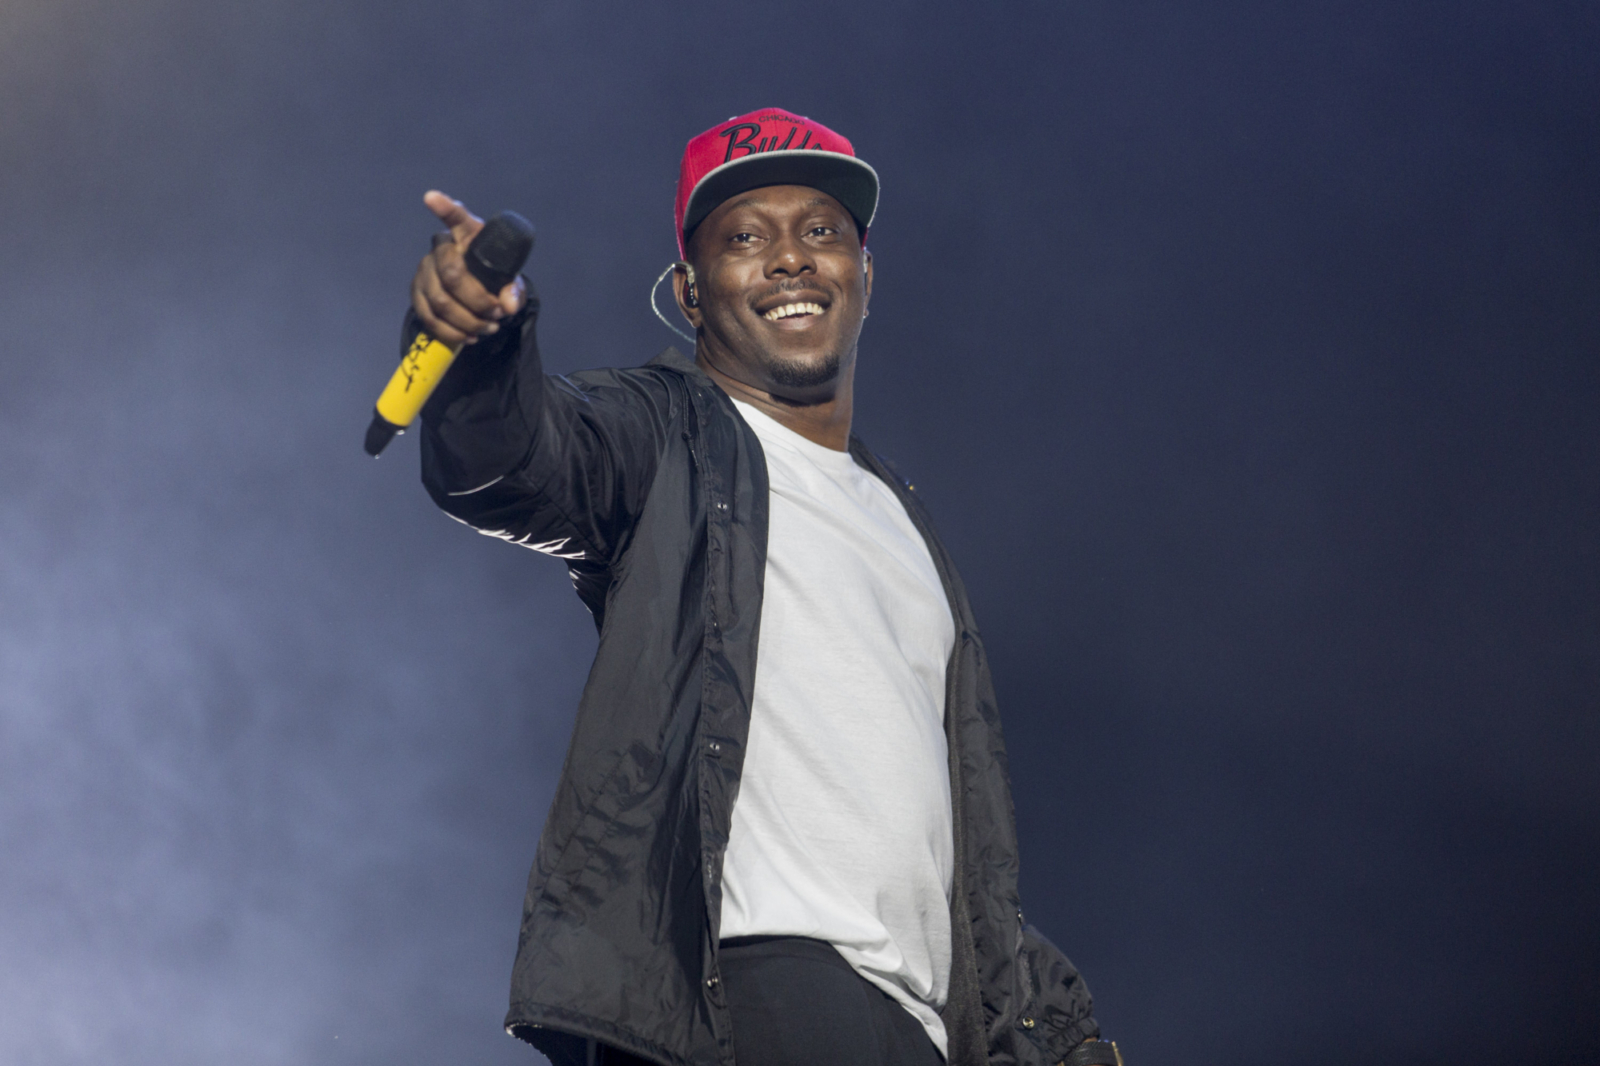 Dizzee Rascal draws the biggest crowd of the weekend so far at Bestival 2017 